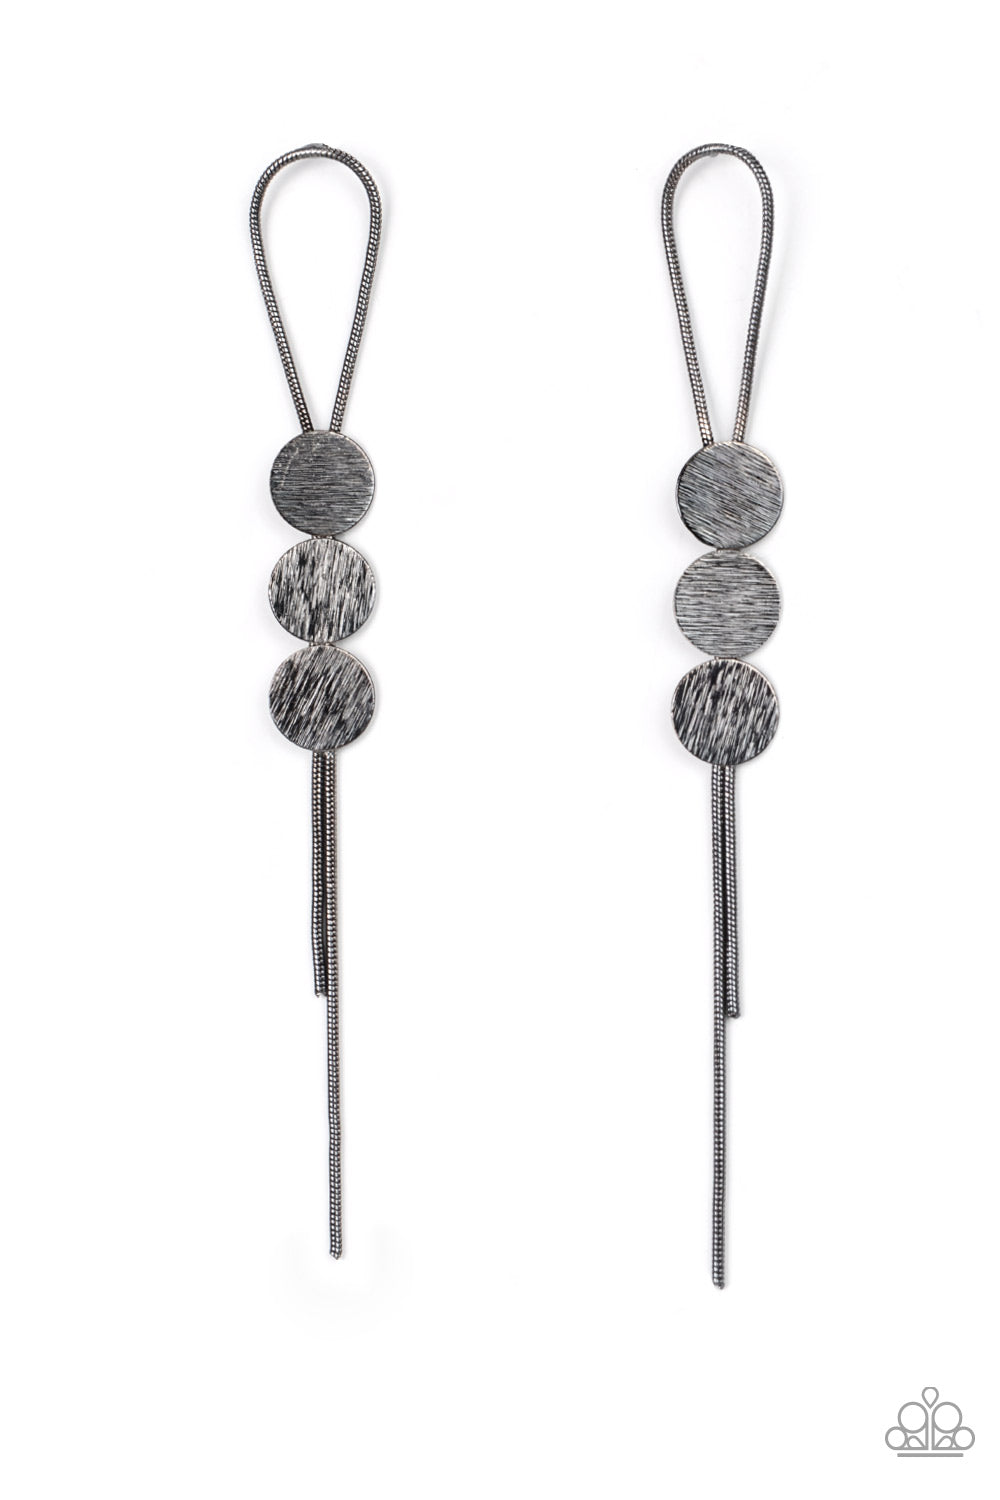 Bolo Beam Black Post Earring - Paparazzi Accessories  A gunmetal loop of round snake chain is held in place by a trio of scratched gunmetal discs, creating a trendy bolo-like lure. Earring attaches to a standard post fitting.  Sold as one pair of post earrings.